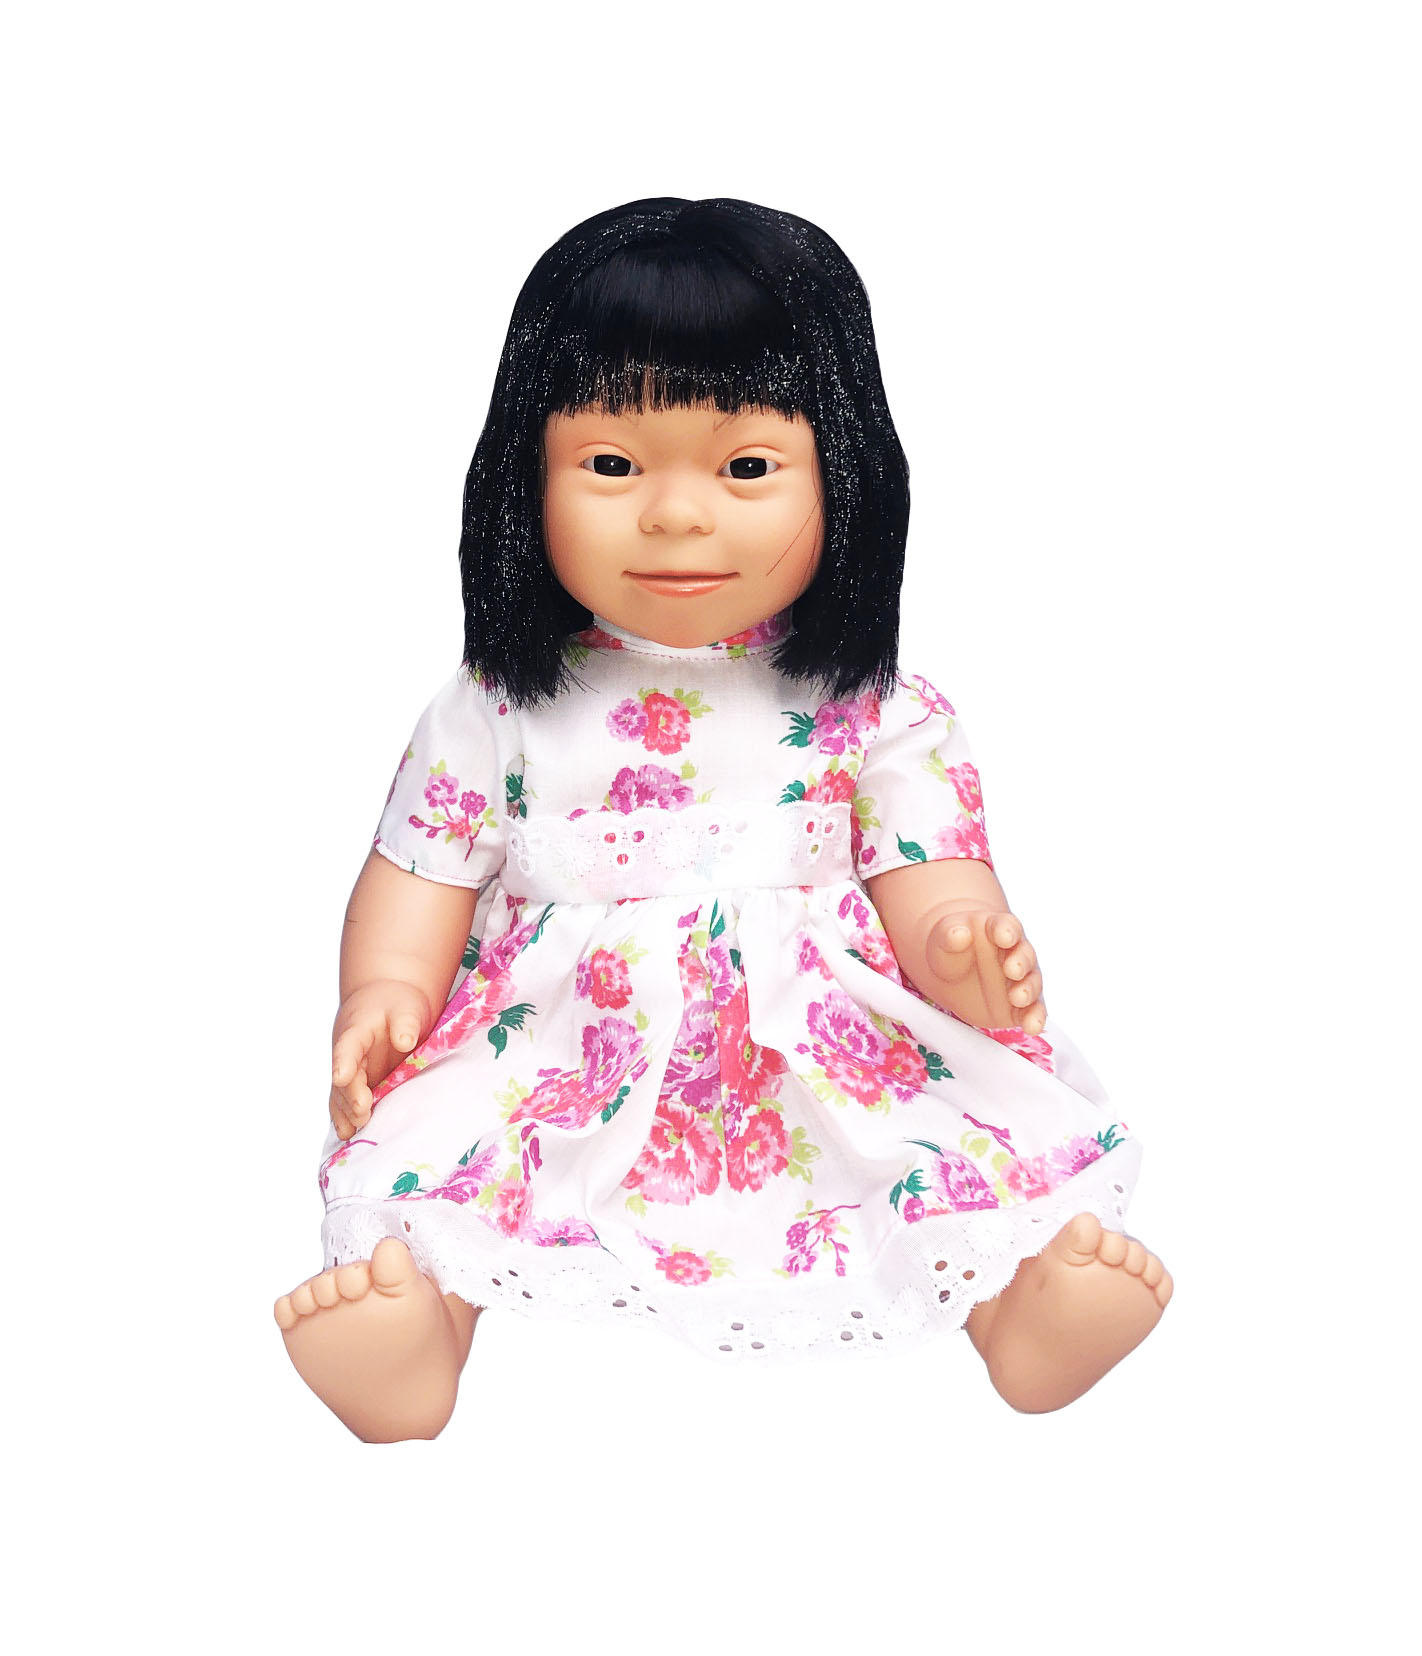 baby doll with black hair